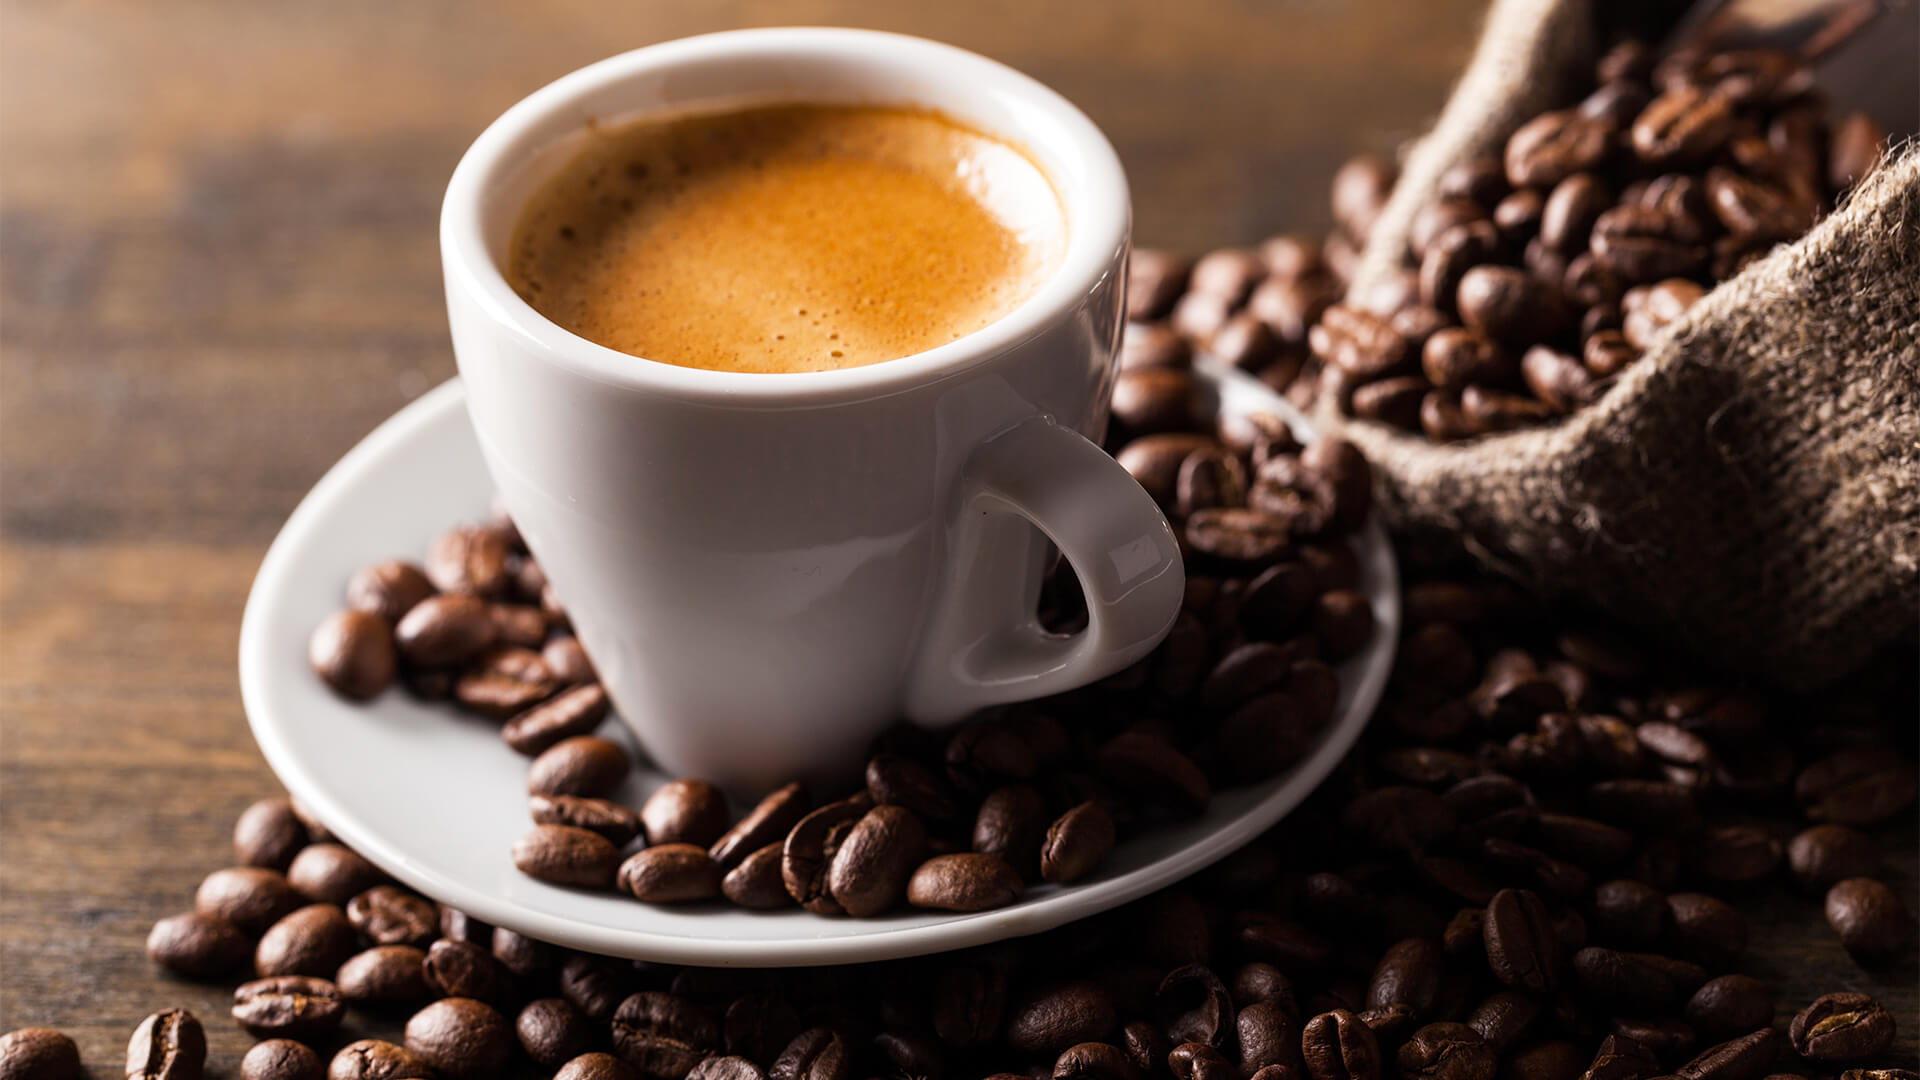 Morning Espresso Can Give Medical advantages